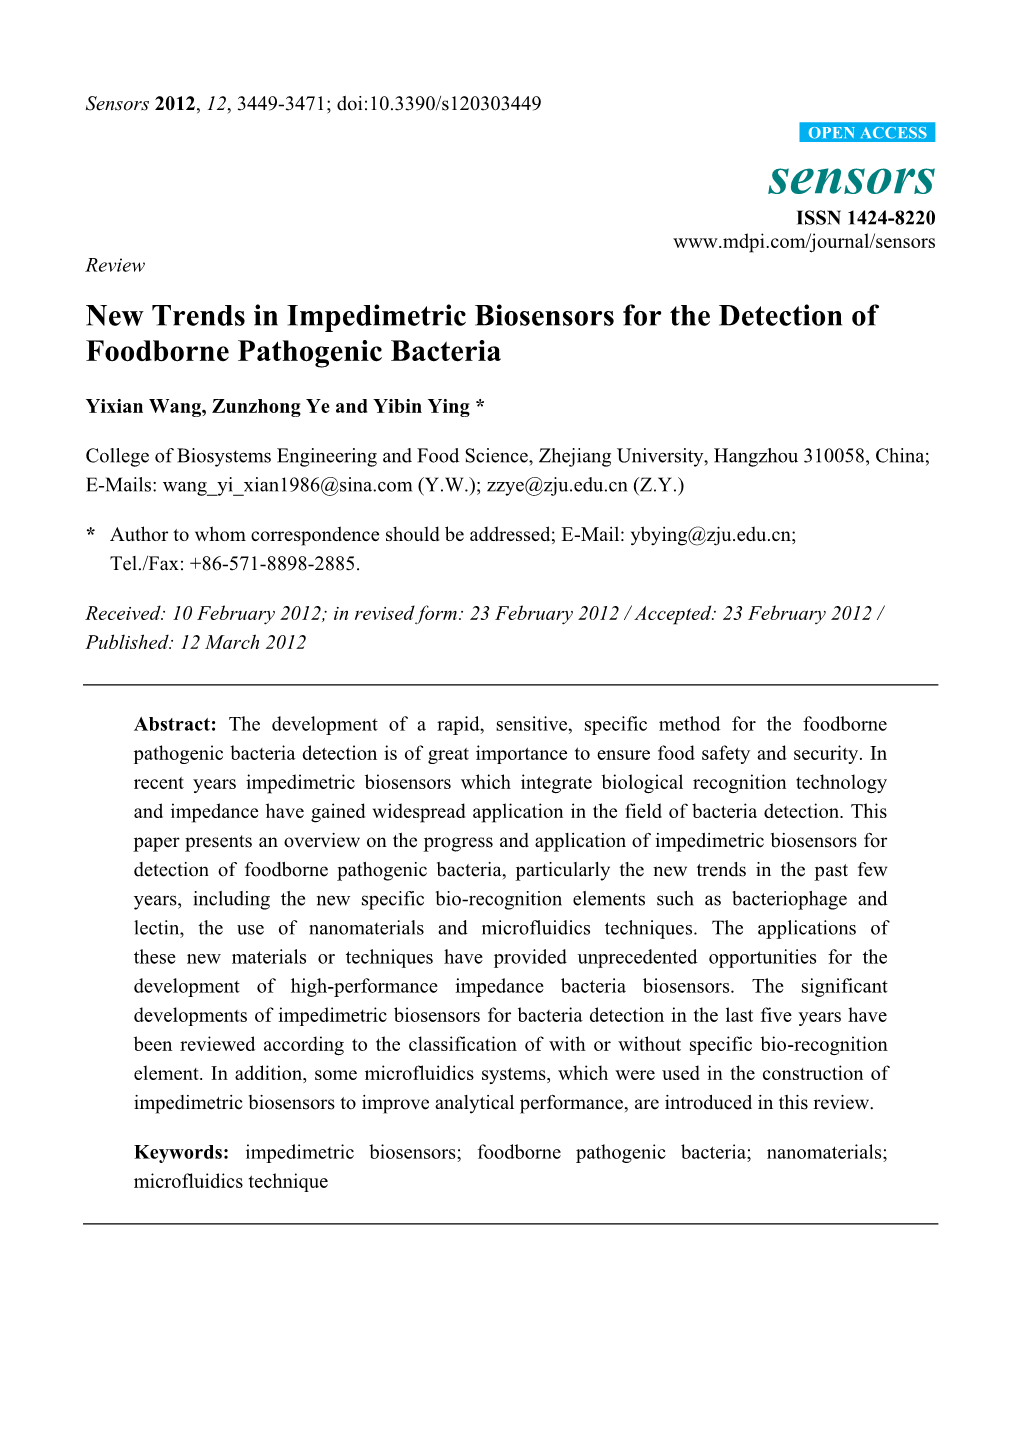 New Trends in Impedimetric Biosensors for the Detection of Foodborne Pathogenic Bacteria